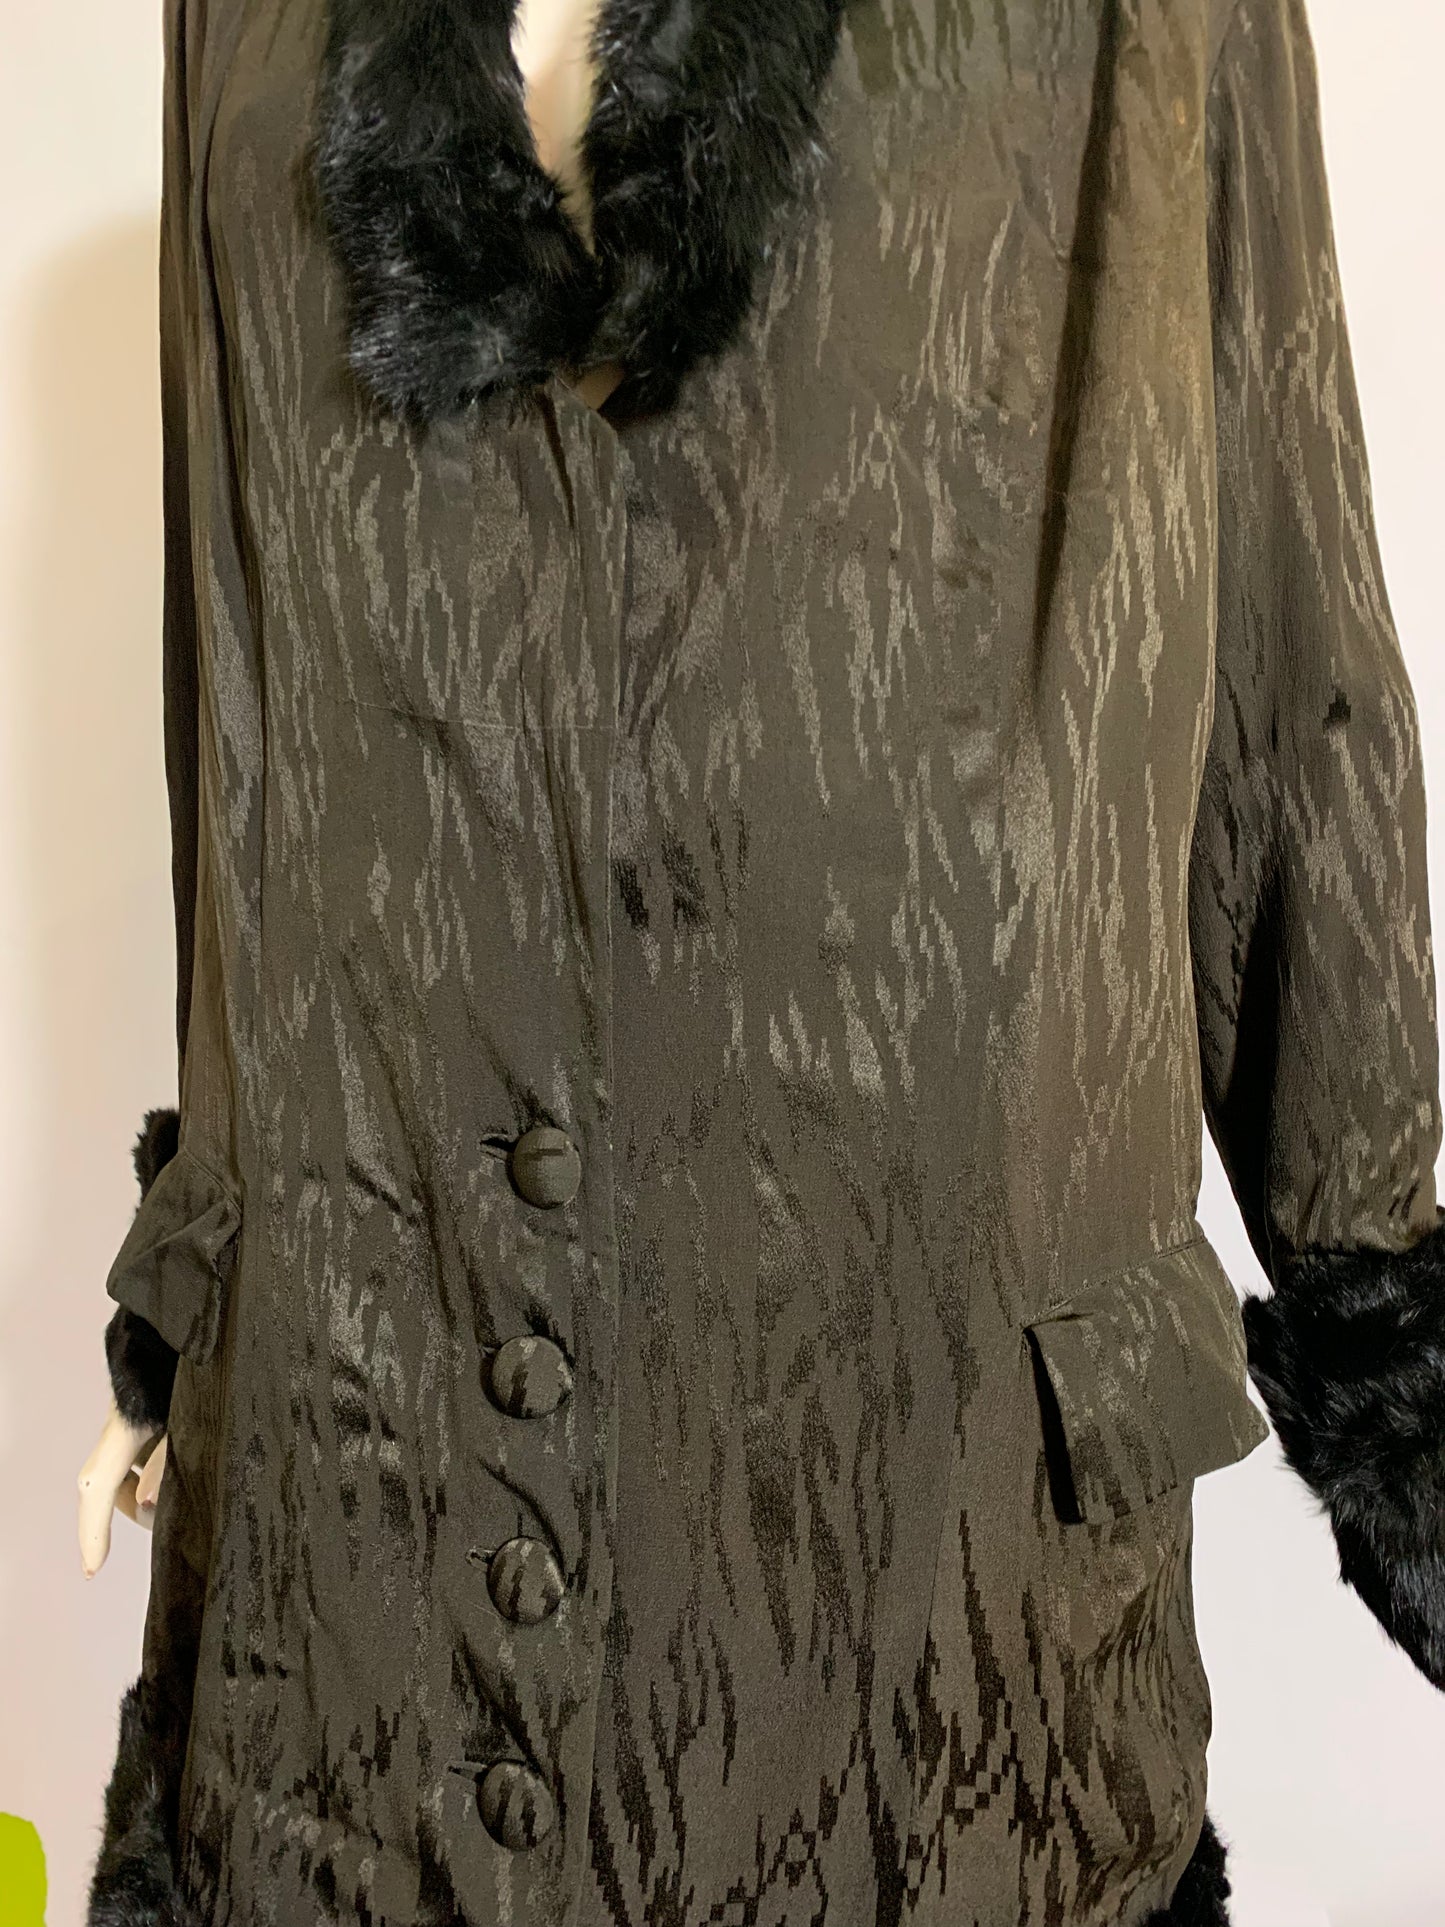 Fur Trimmed Flame Textured Silk Jacket and Skirt in Rich Deep Brown circa 1910s